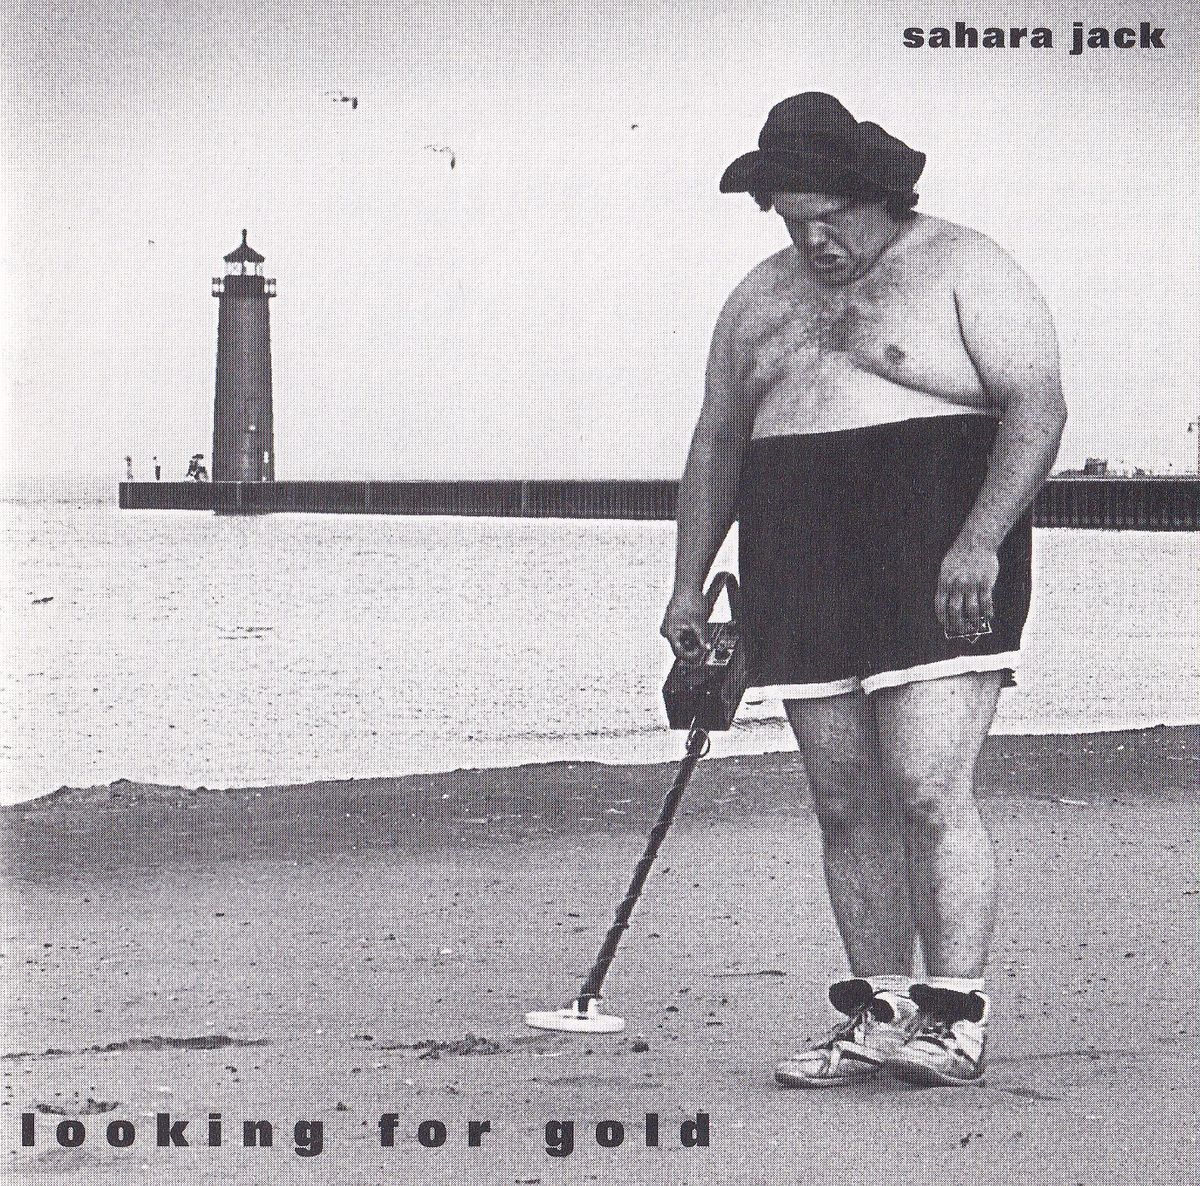 Sahara Jack - Looking For Gold 30th Anniversary Reunion